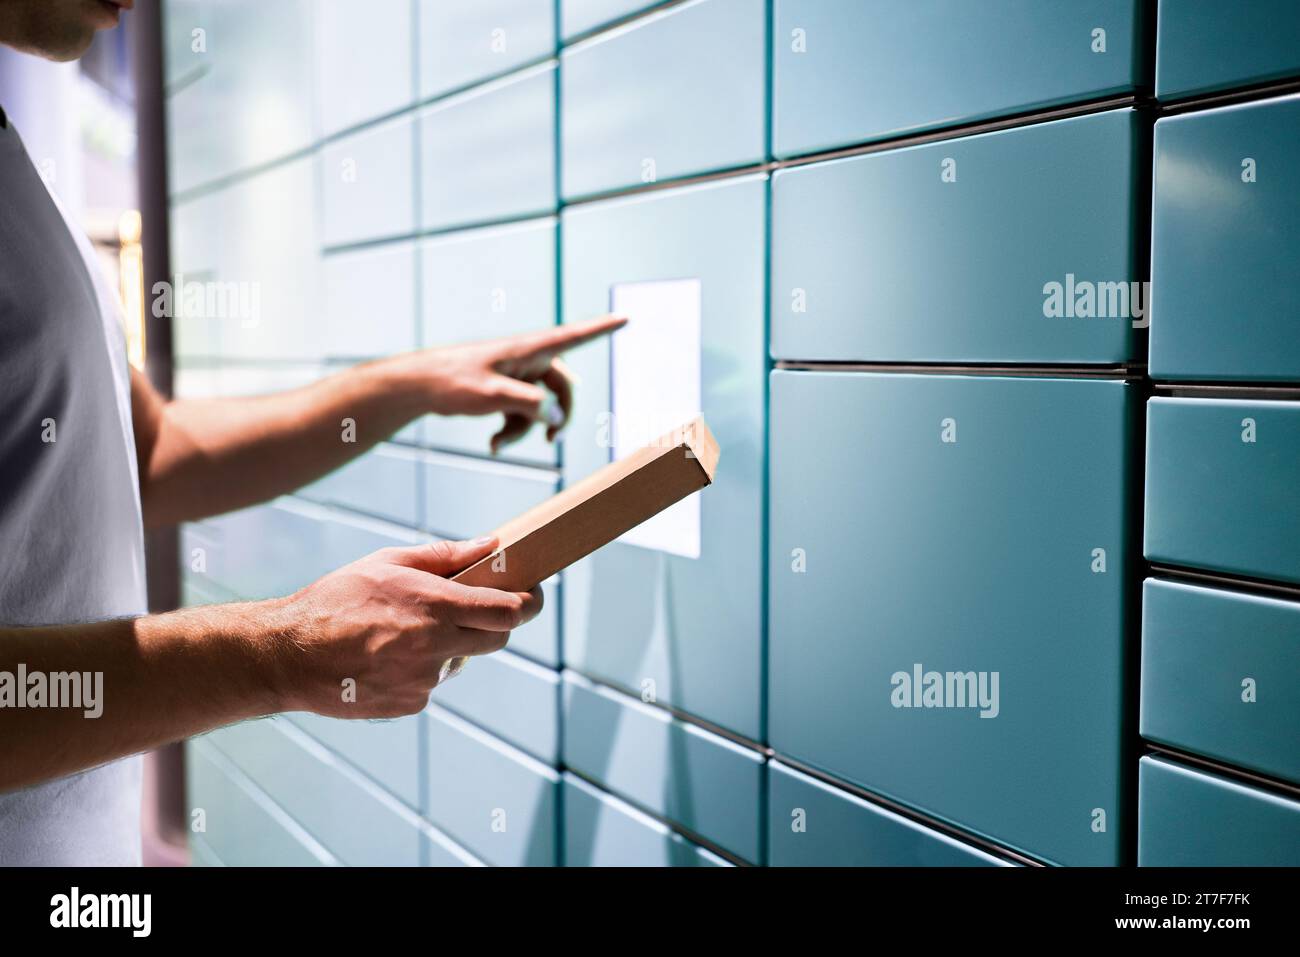 Locker parcel service. Package delivery to post mail box machine. Packet automat in postal office. Man using touchscreen. Pick up at storage. Stock Photo